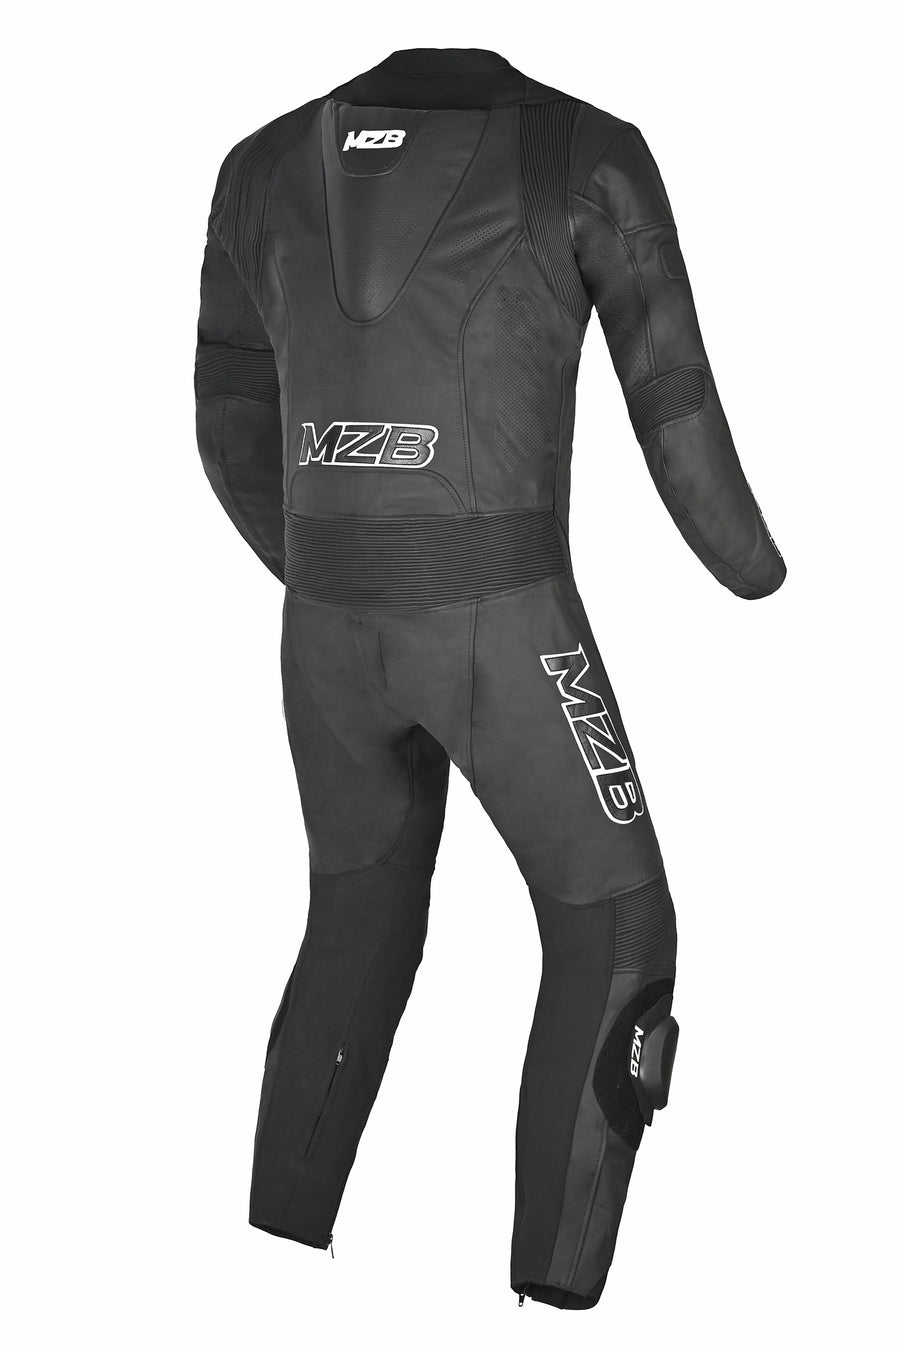 MZB Maximus Motorcycle Leather Suit